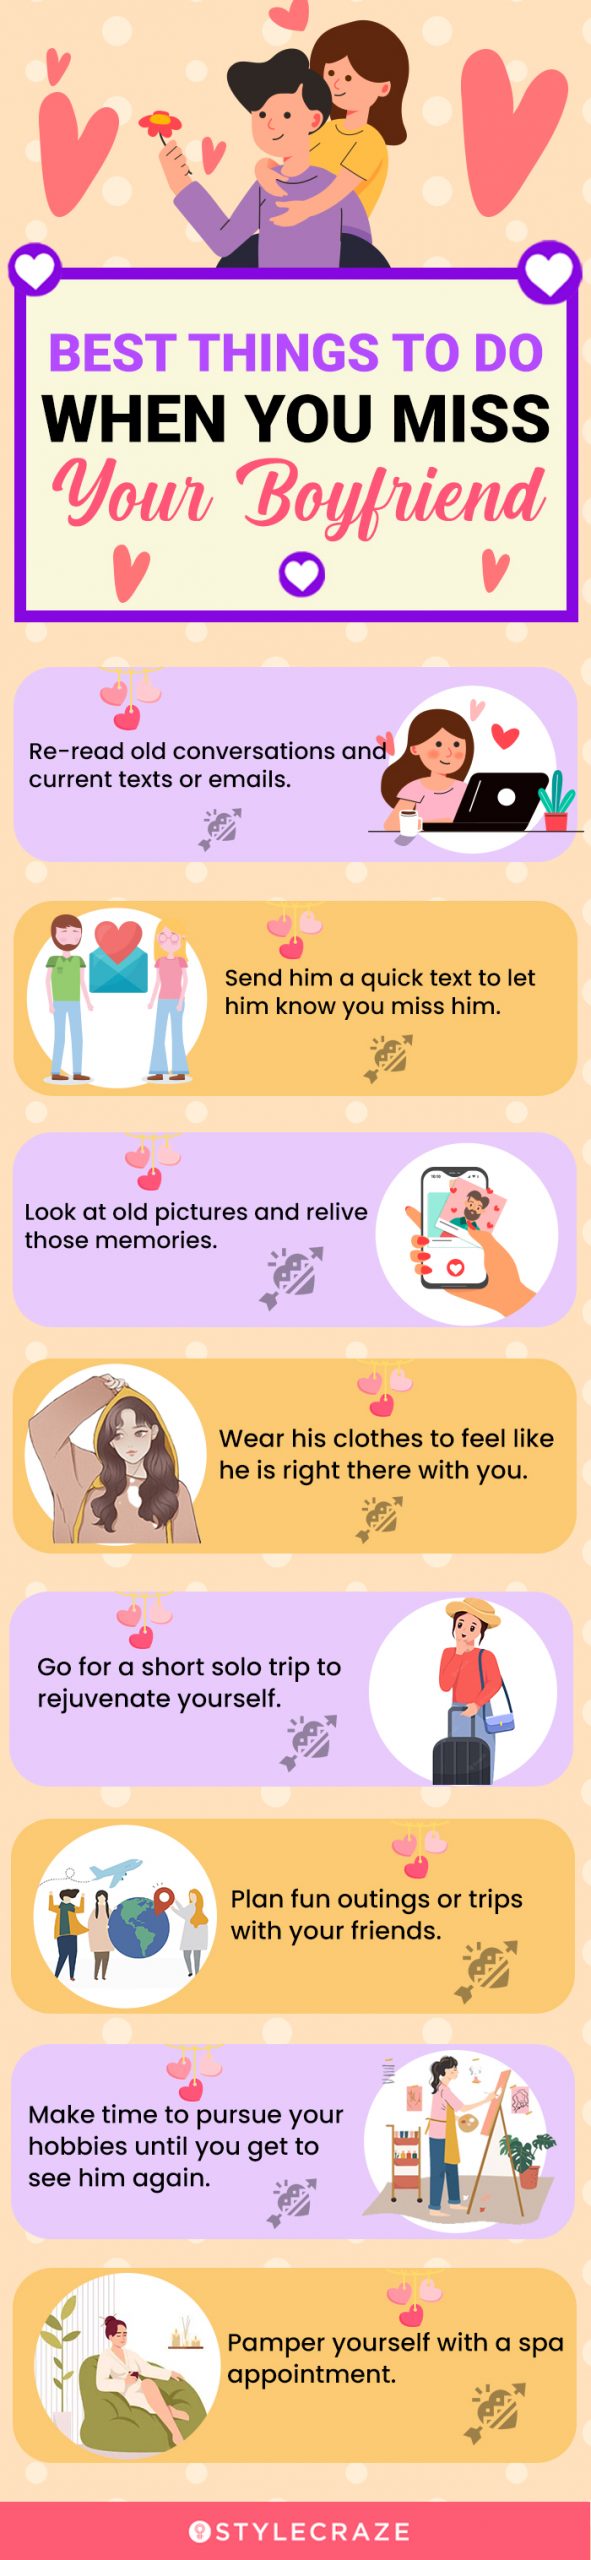 best thigs to do when you miss your boyfriend (infographic)